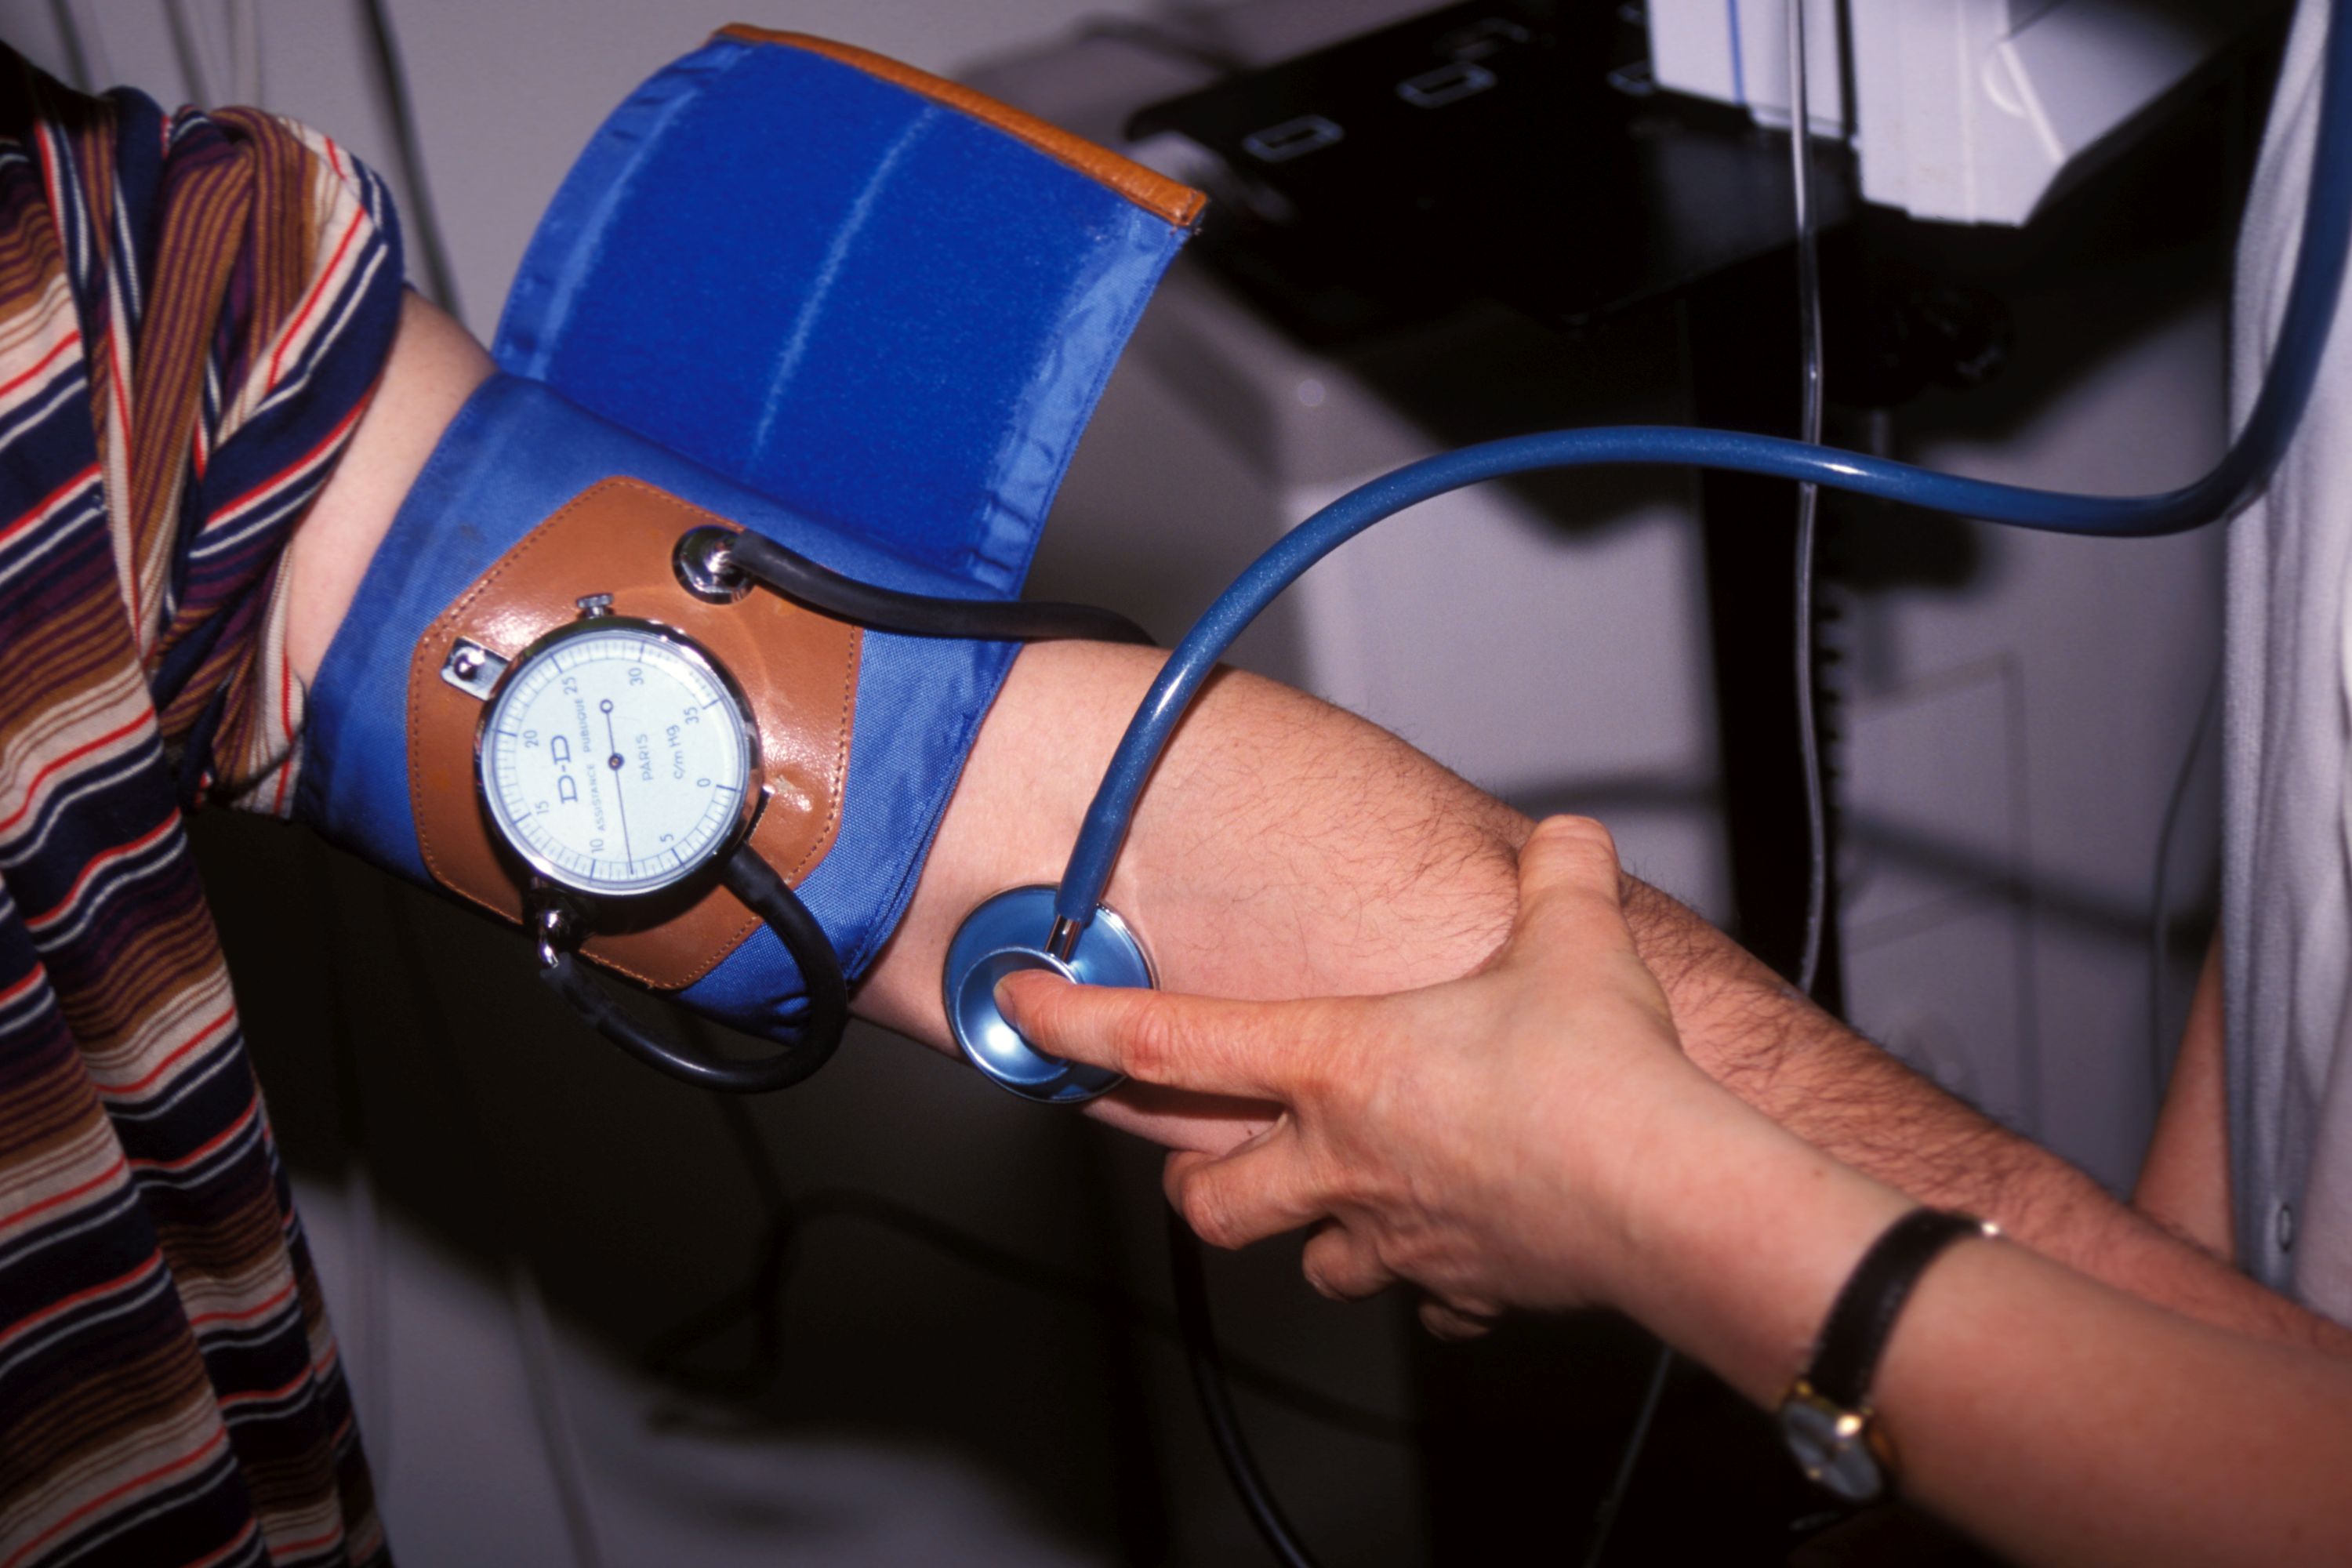 Hypertension: A New Drug Coming Soon?